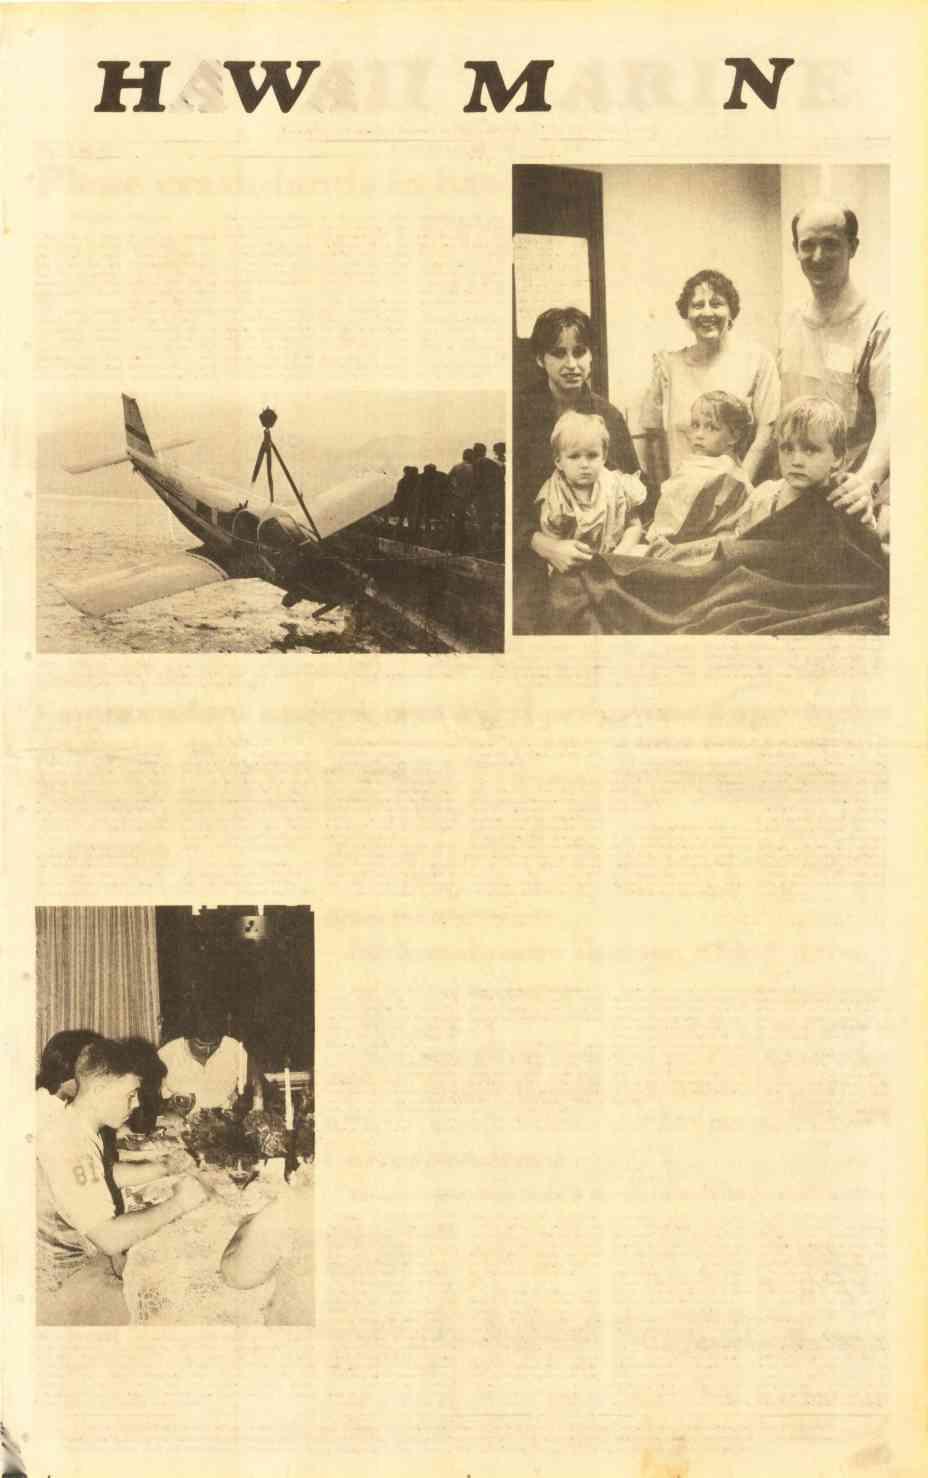 HAWA MARNE Voluntary payment for delivery to MCAS housing/$1 per four week period VOL 10 NO 48 KANEOHE BAY, HAWA, DEC 2, 1981 TWENTY PAGES Plane crash-lands in bay by Cpl Chris The pilot of a Piper